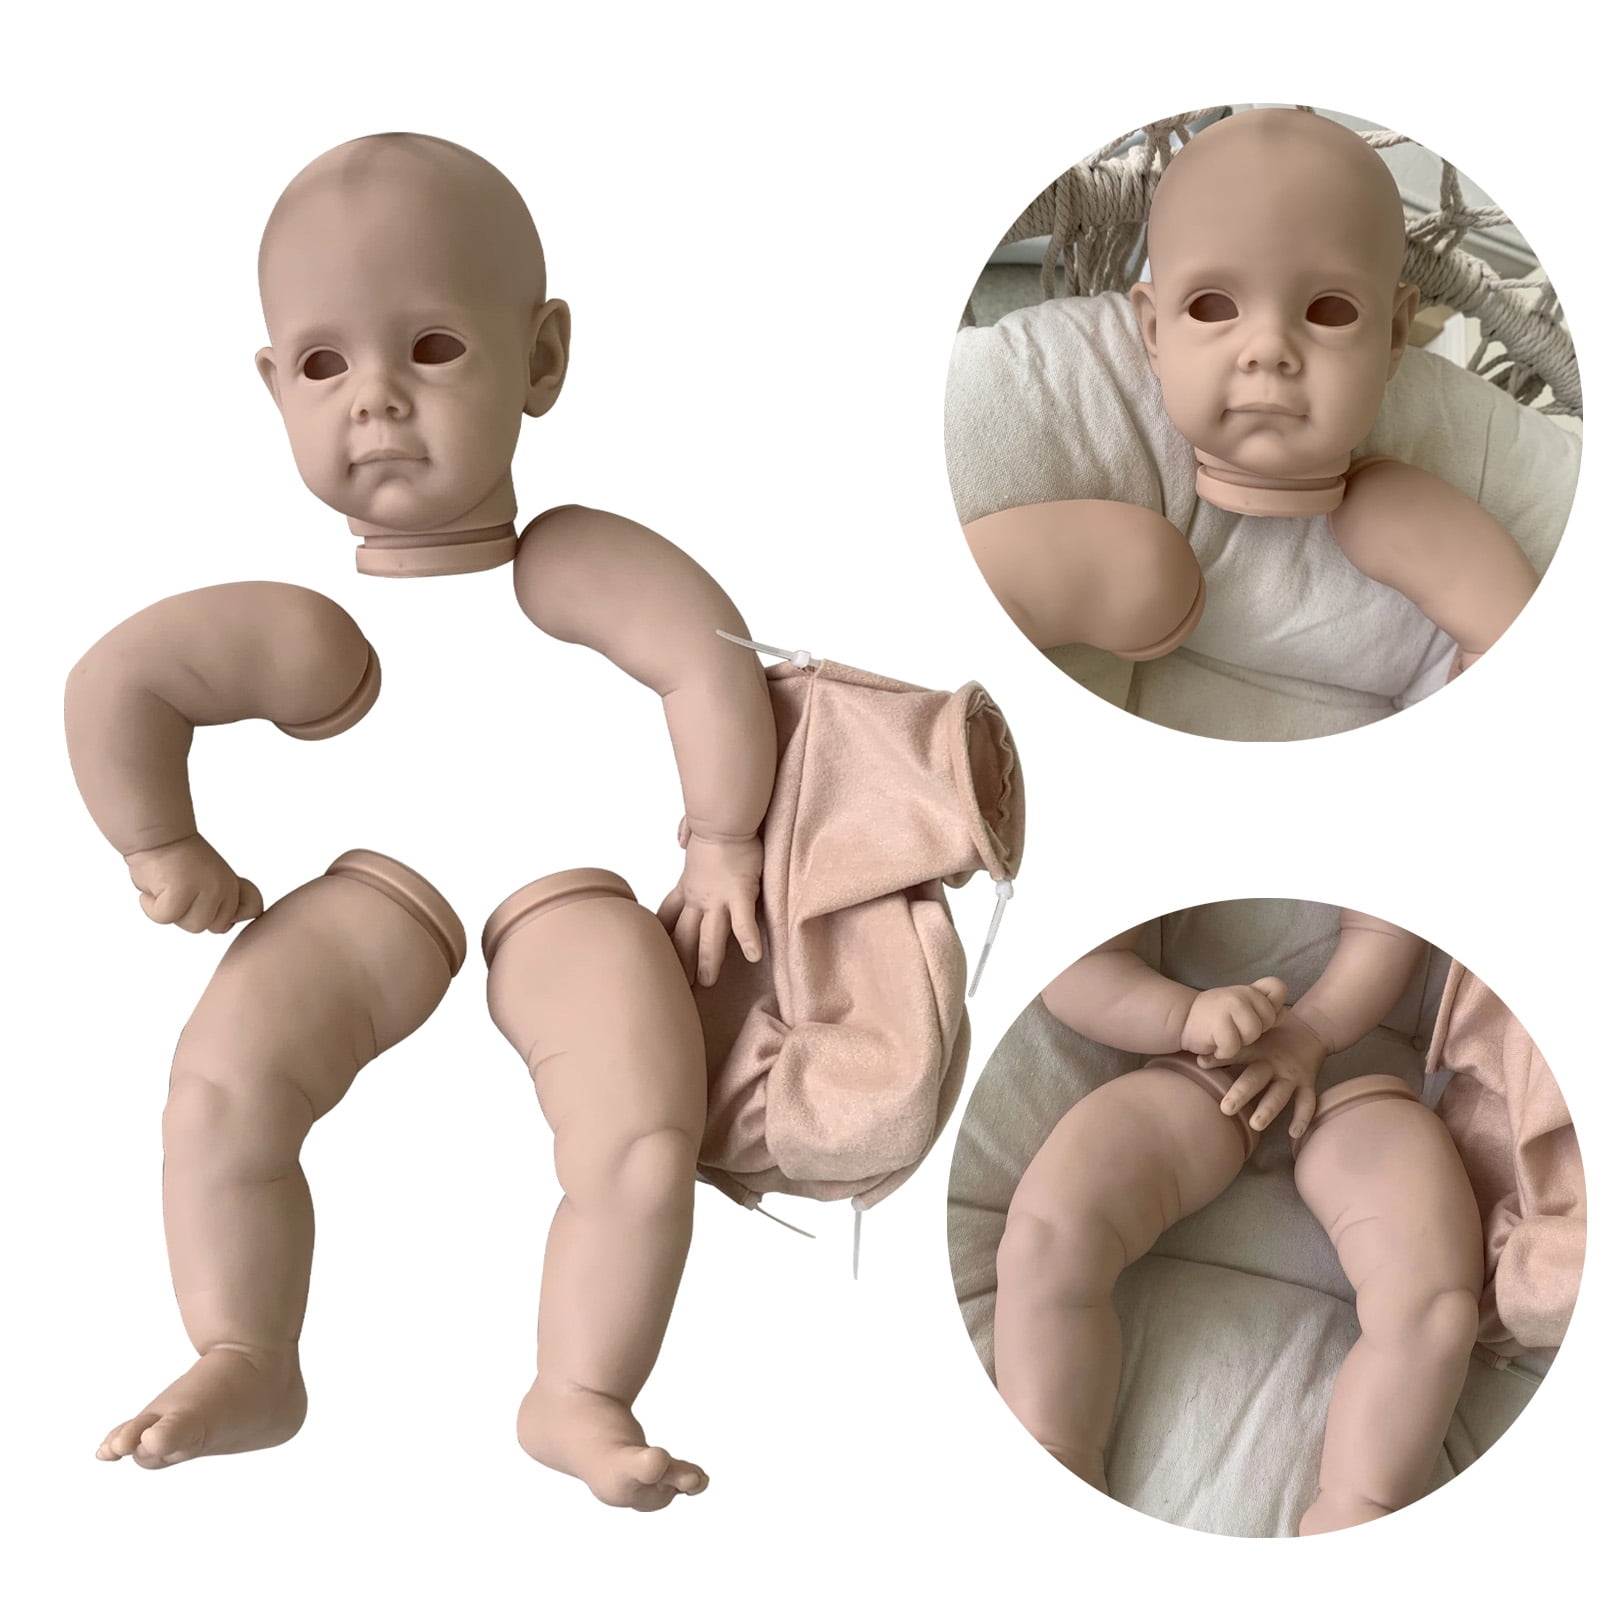 Details about   22'' Maggi DIY Reborn Baby Doll Kit Lifelike Vinyl Unpainted Unfinished Toy Gift 